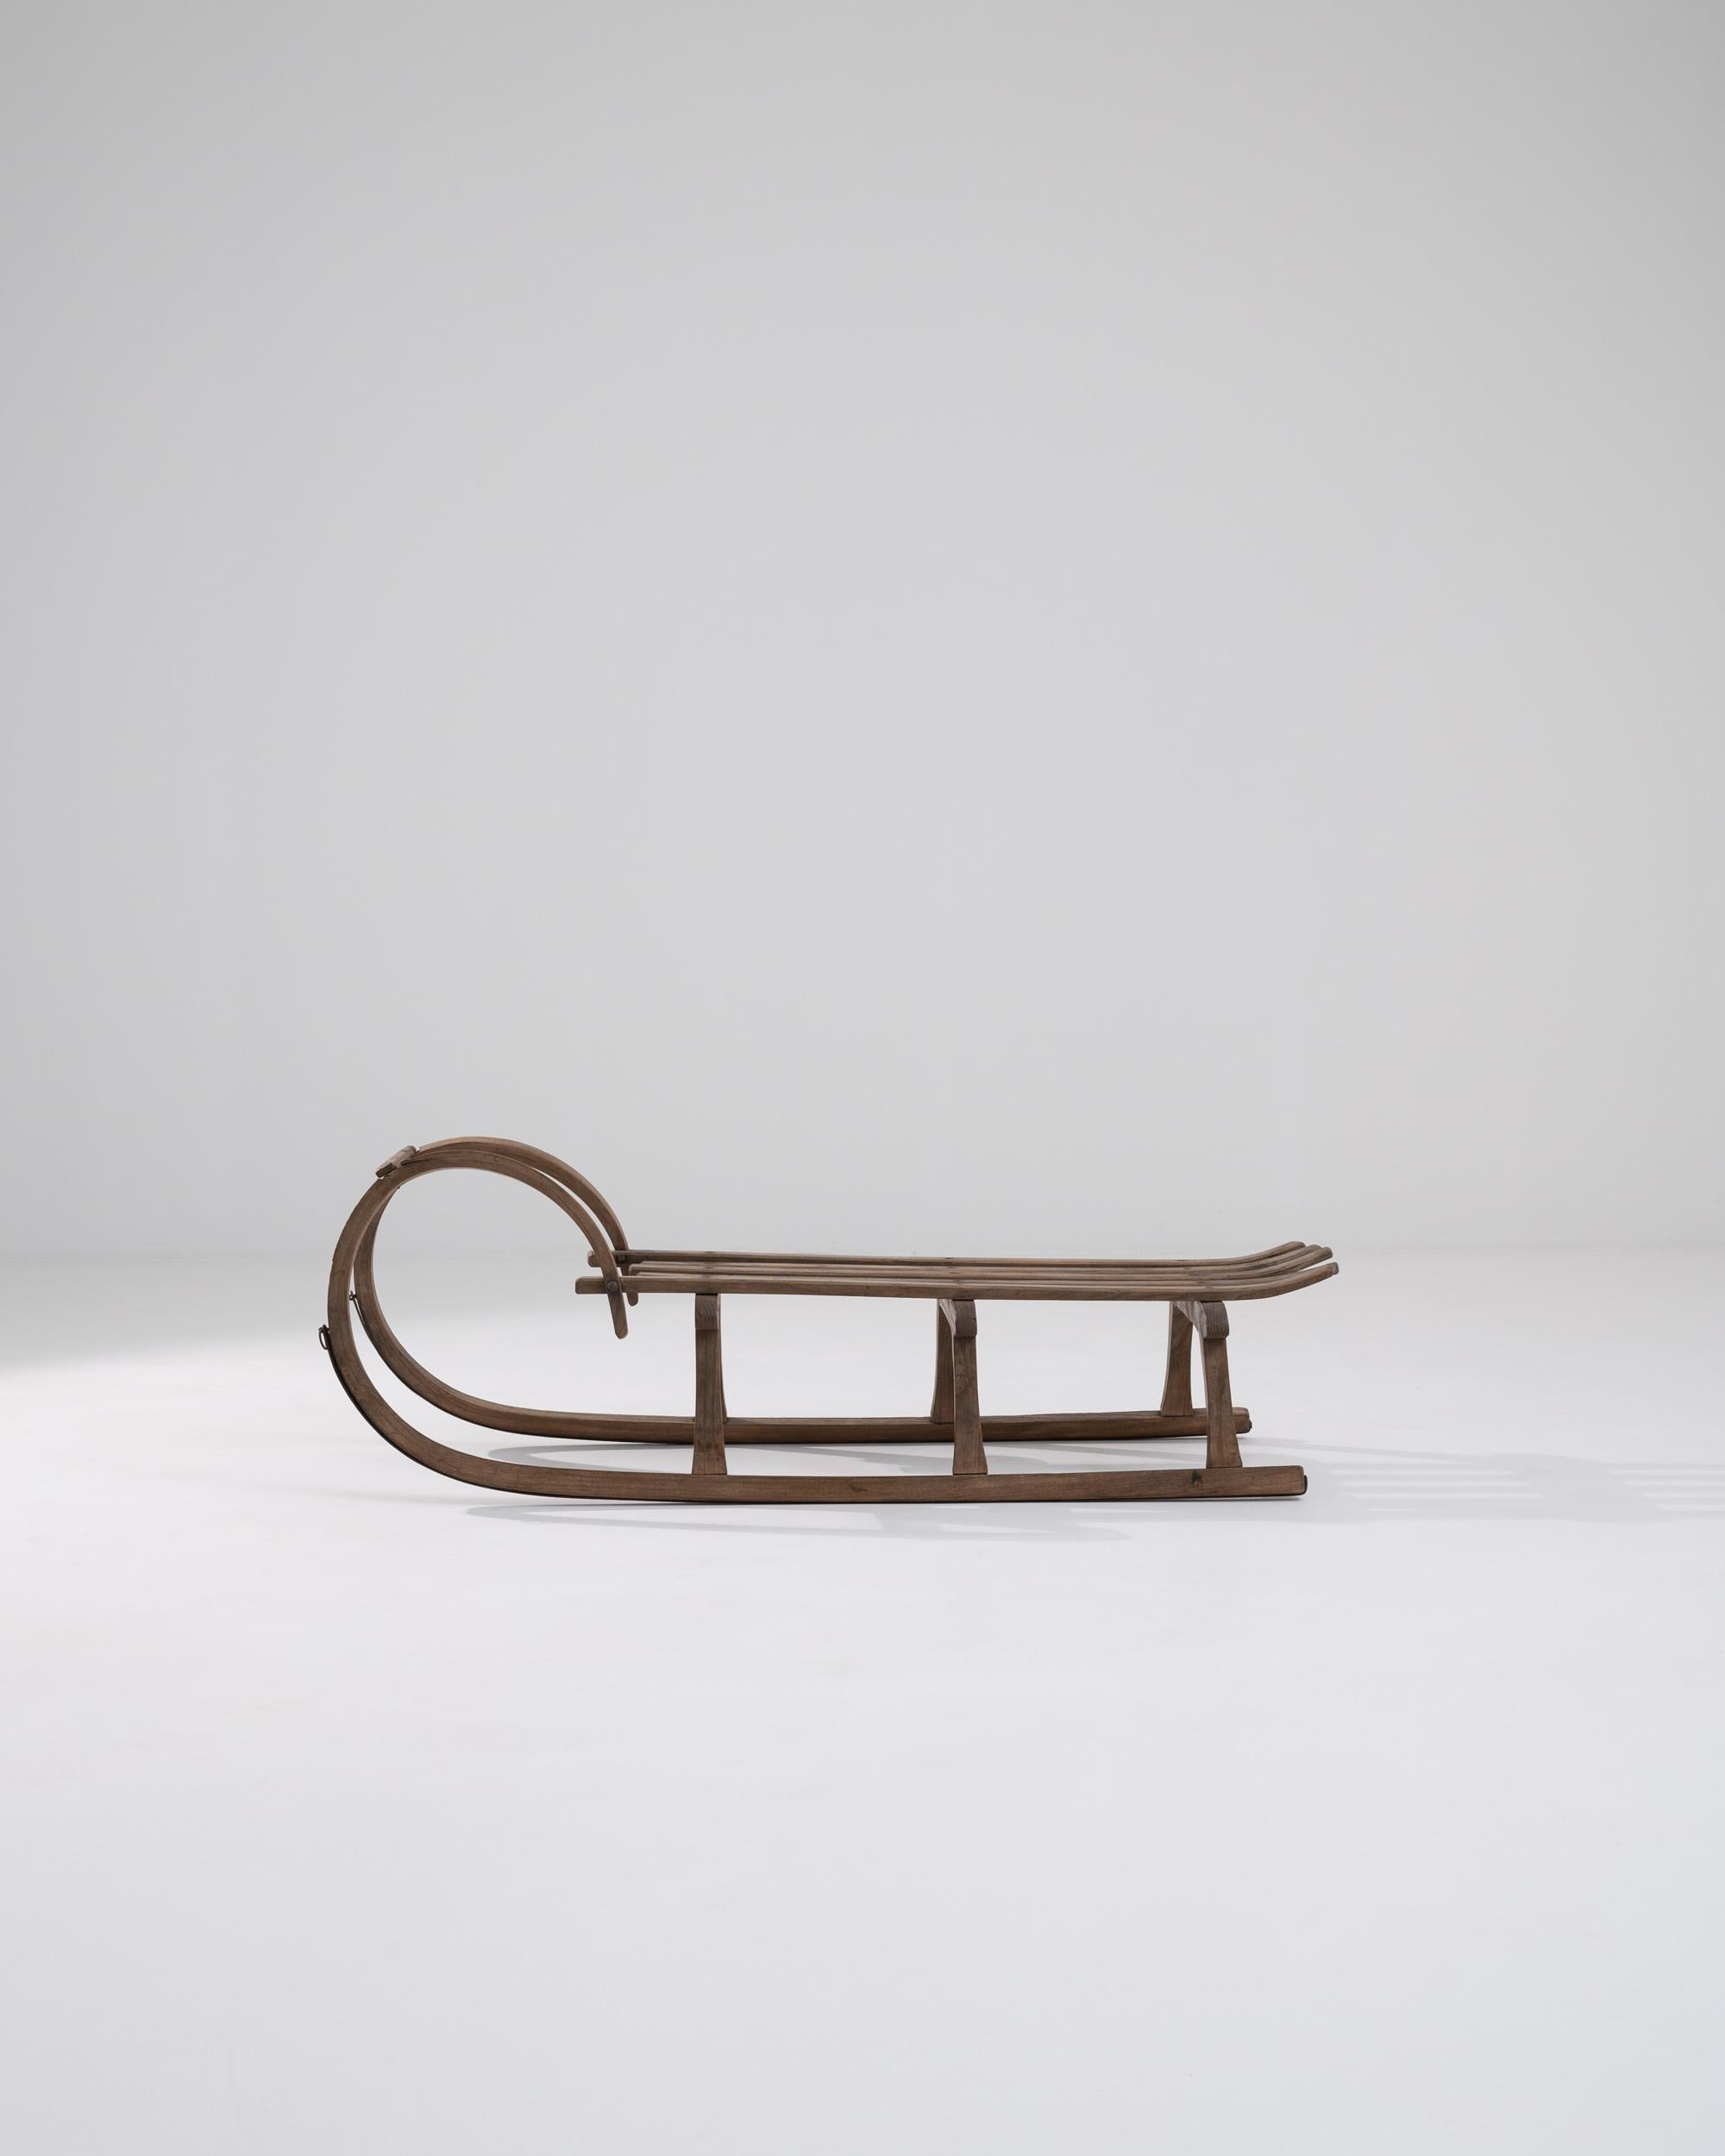 A wooden sled from early 20th century Central Europe. Wooden struts composing the seat, runners, and handles have been pleasantly combined to form a toboggan sled. This classic toboggan, seemingly unaged, is ready for another race down a